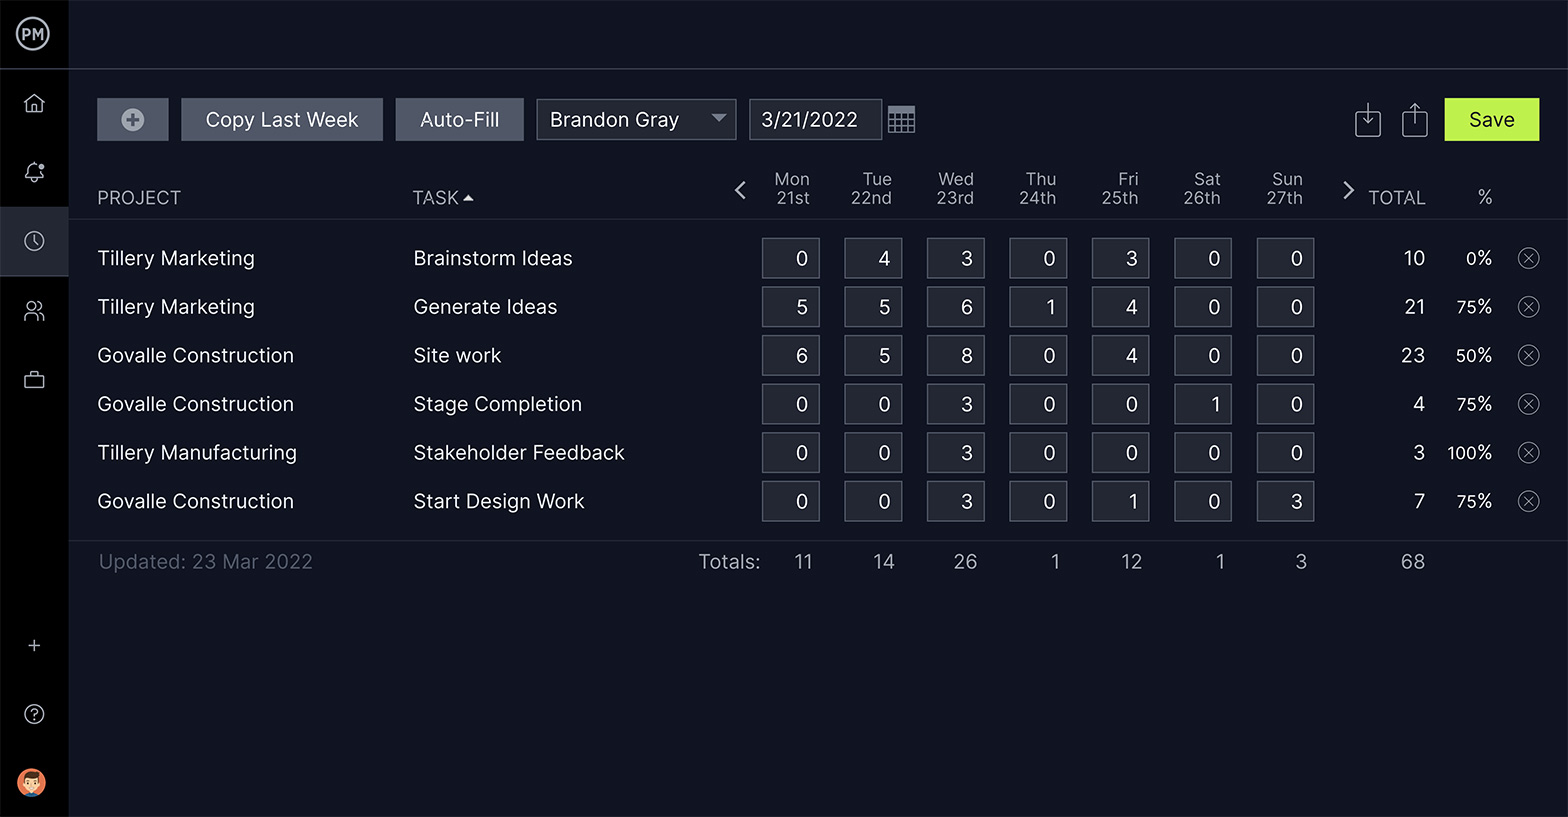 Image of ProjectManager timesheets, one of its construction project management software features